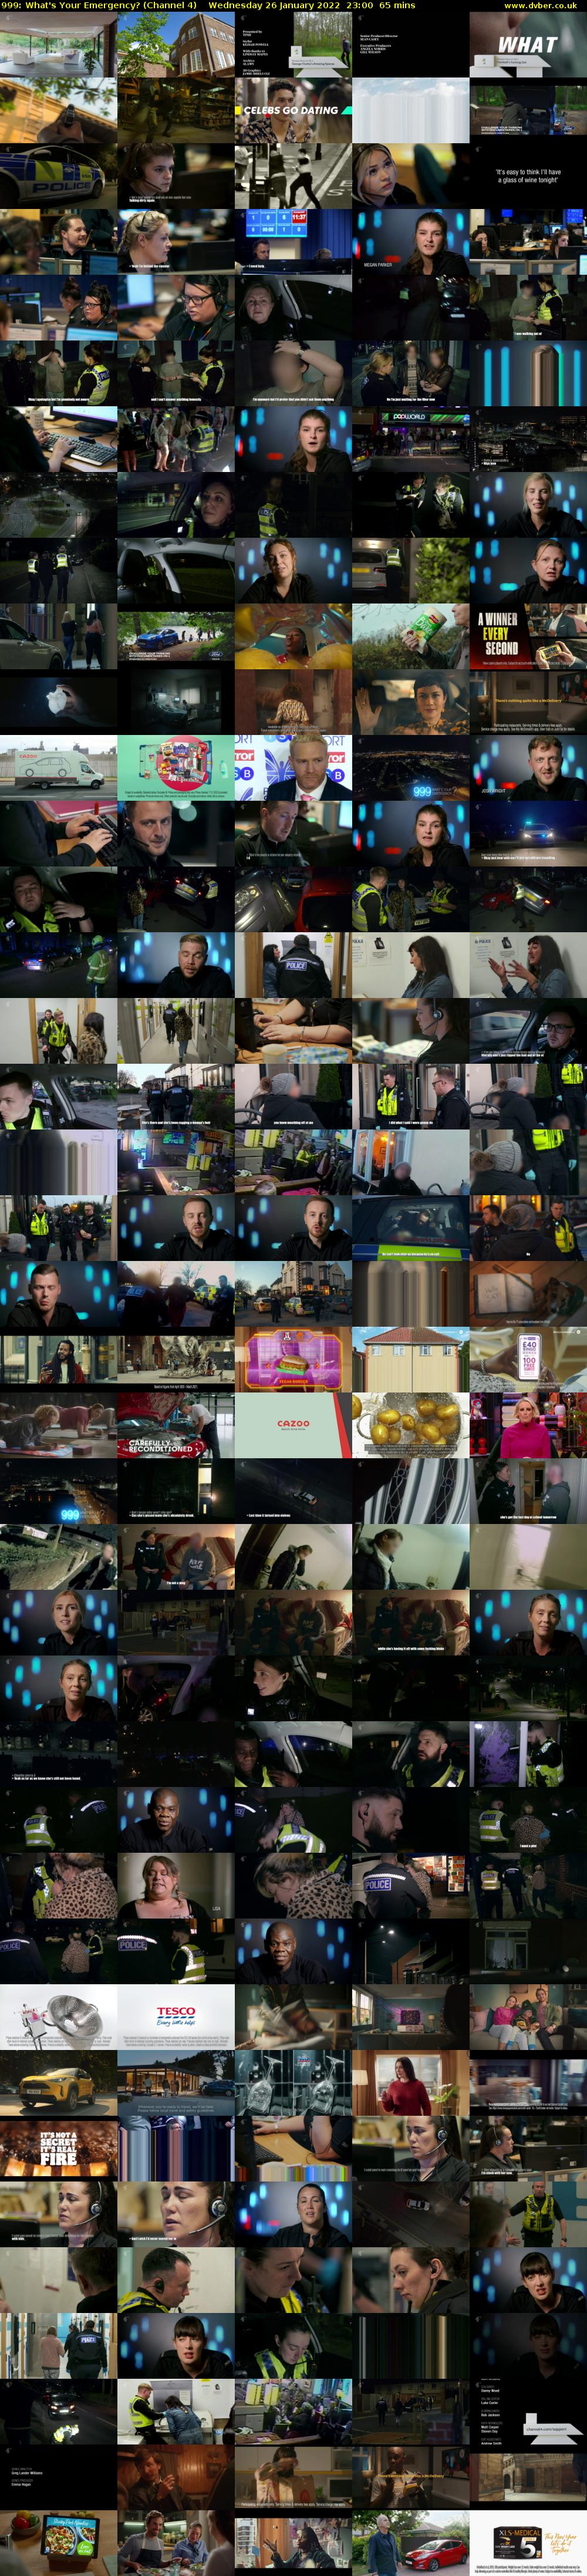 999: What's Your Emergency? (Channel 4) Wednesday 26 January 2022 23:00 - 00:05